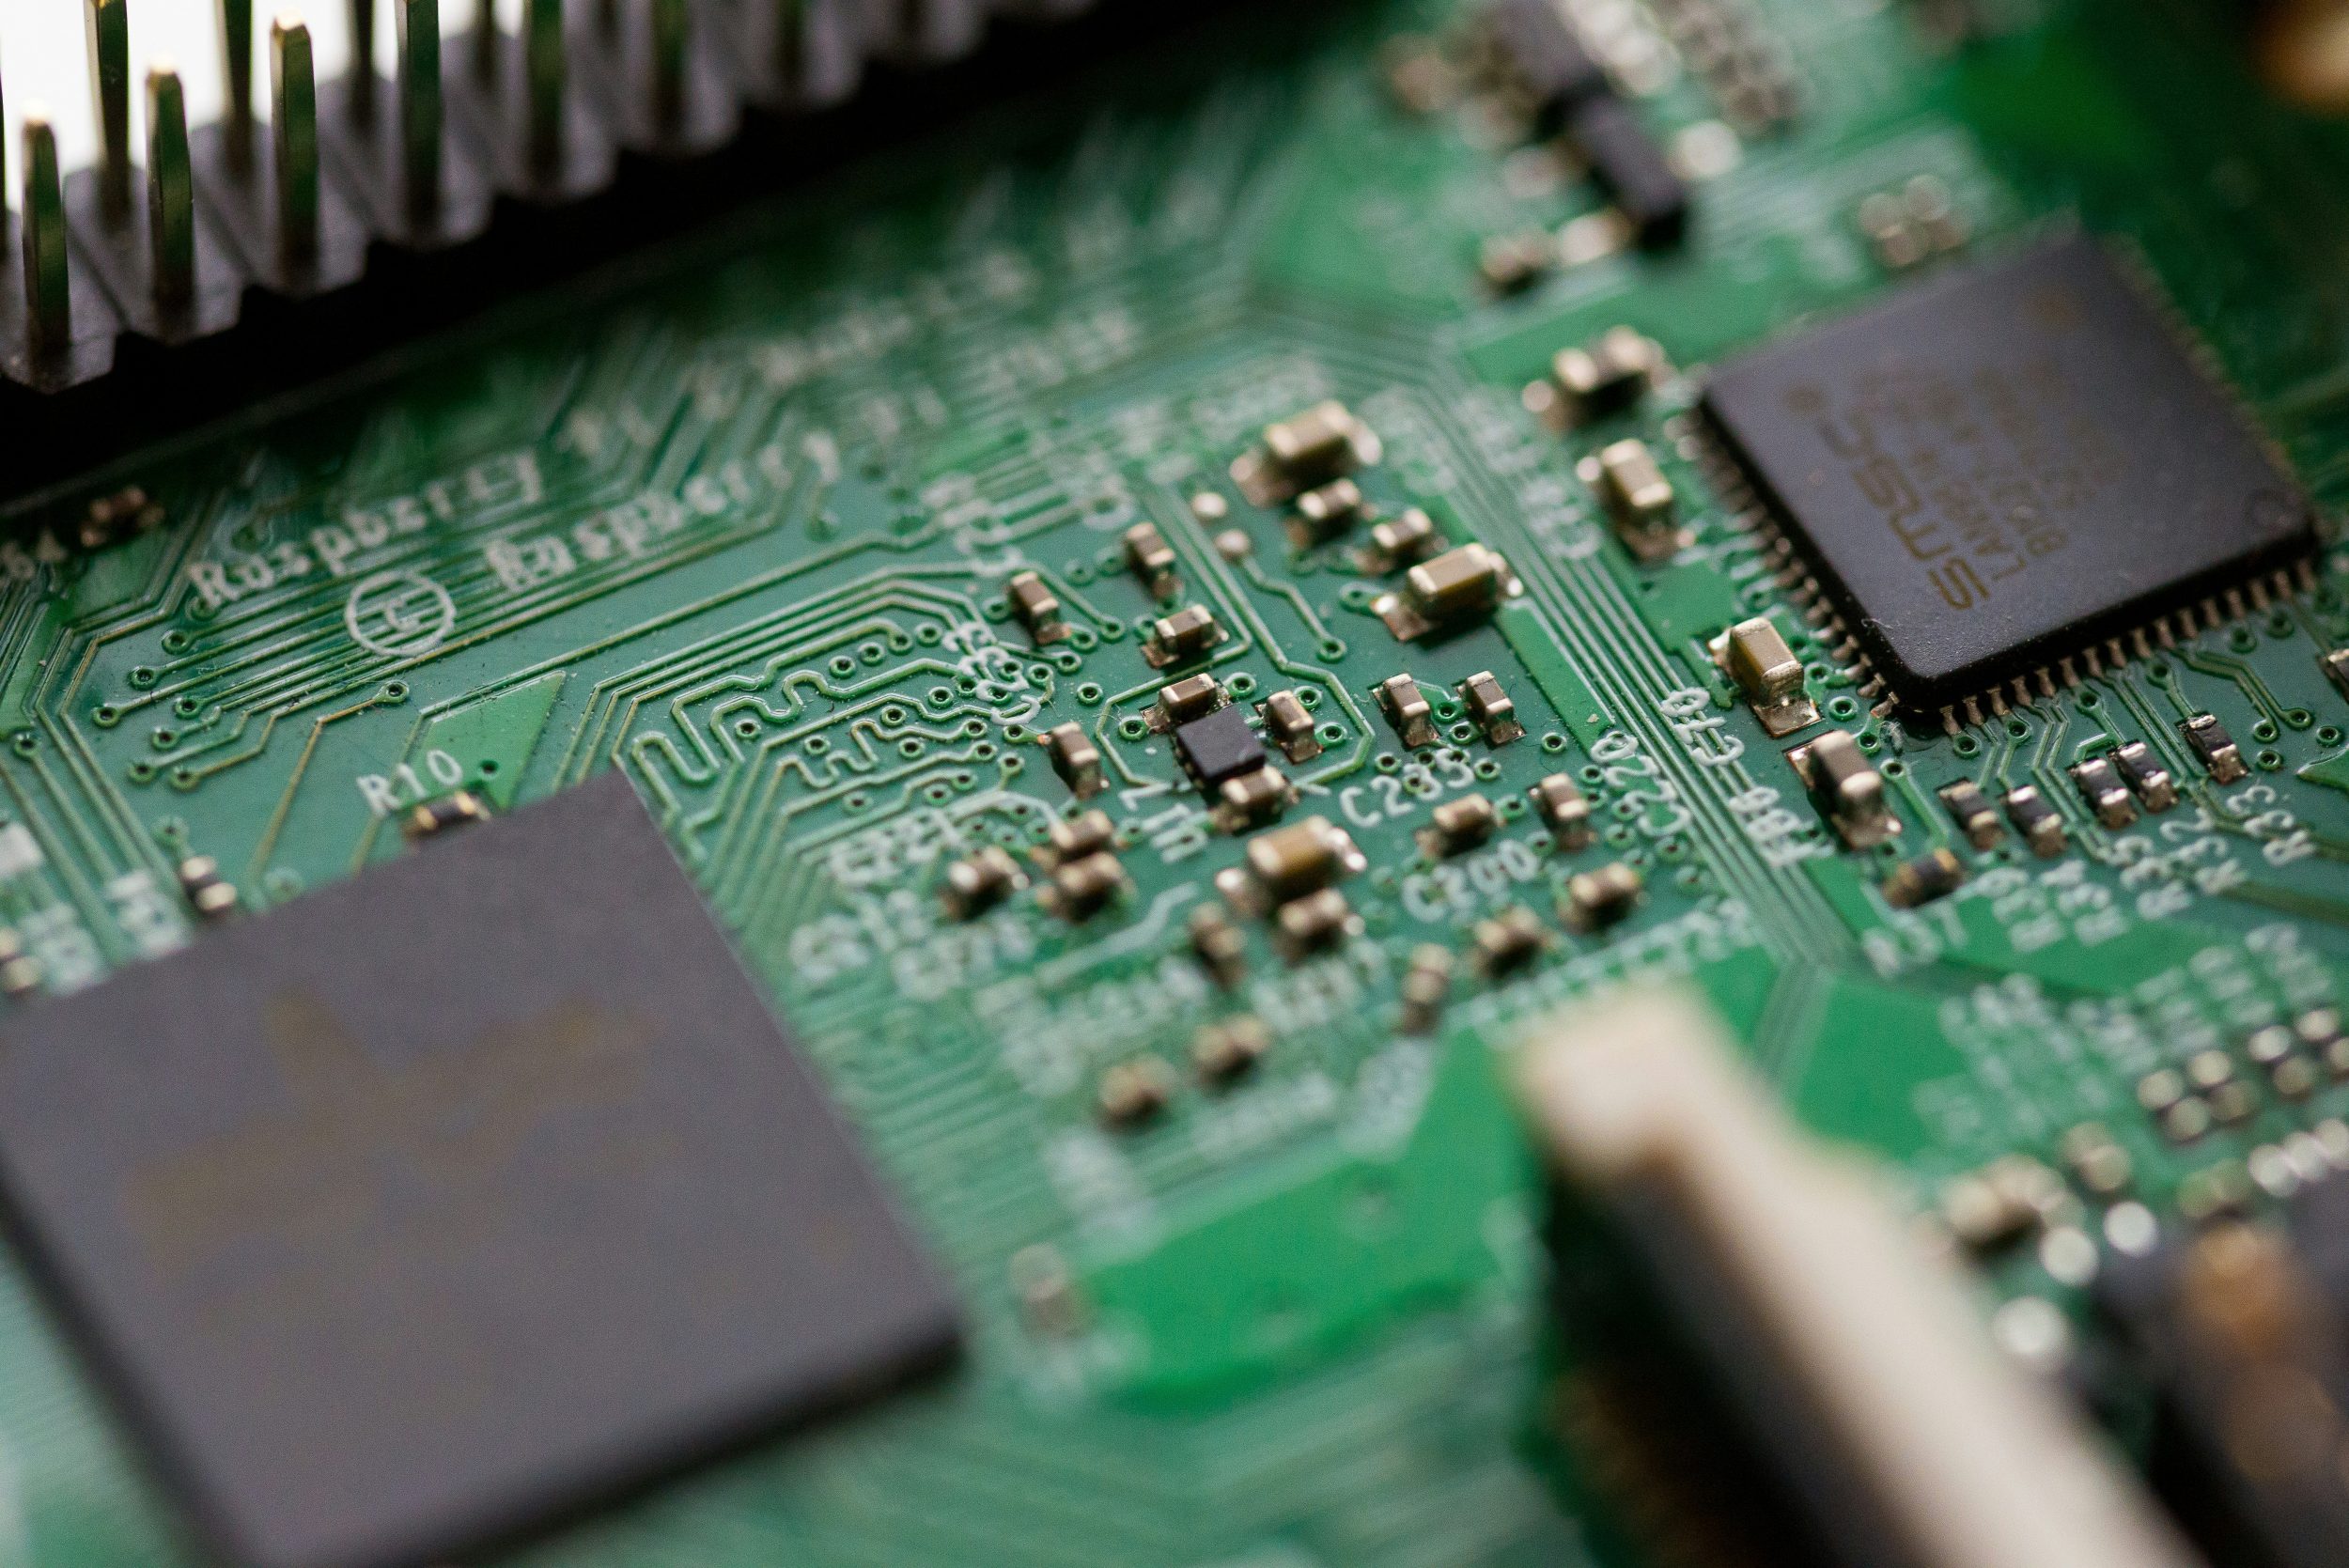 Close up image of a circuit board and components.